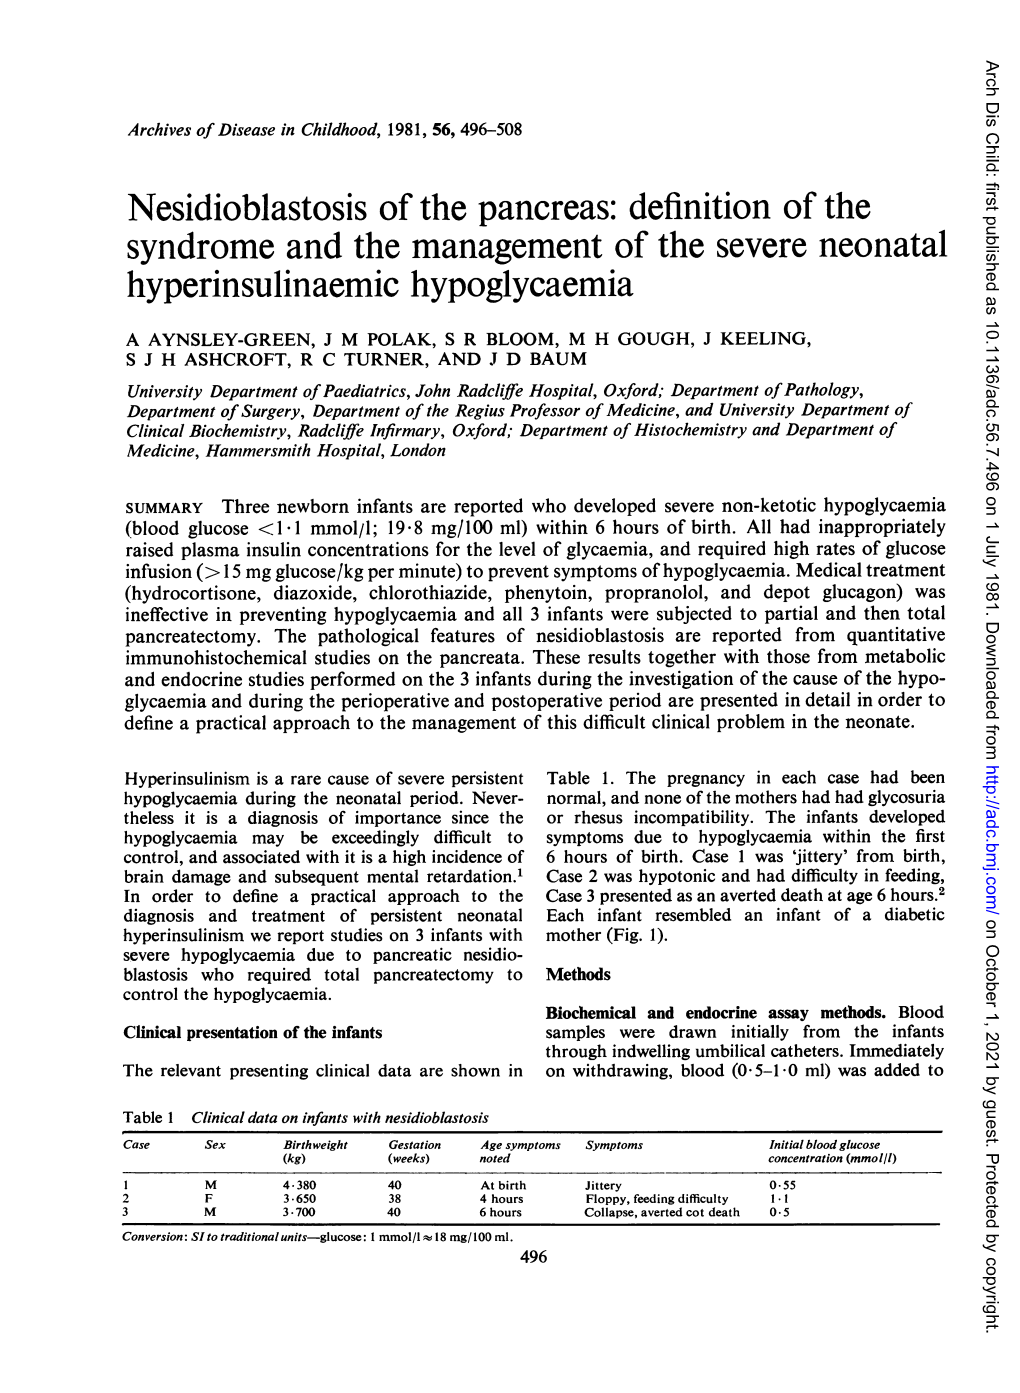 Nesidioblastosis of the Pancreas: Definition of the Syndrome and the Management of the Severe Neonatal Hyperinsulinaemic Hypoglycaemia